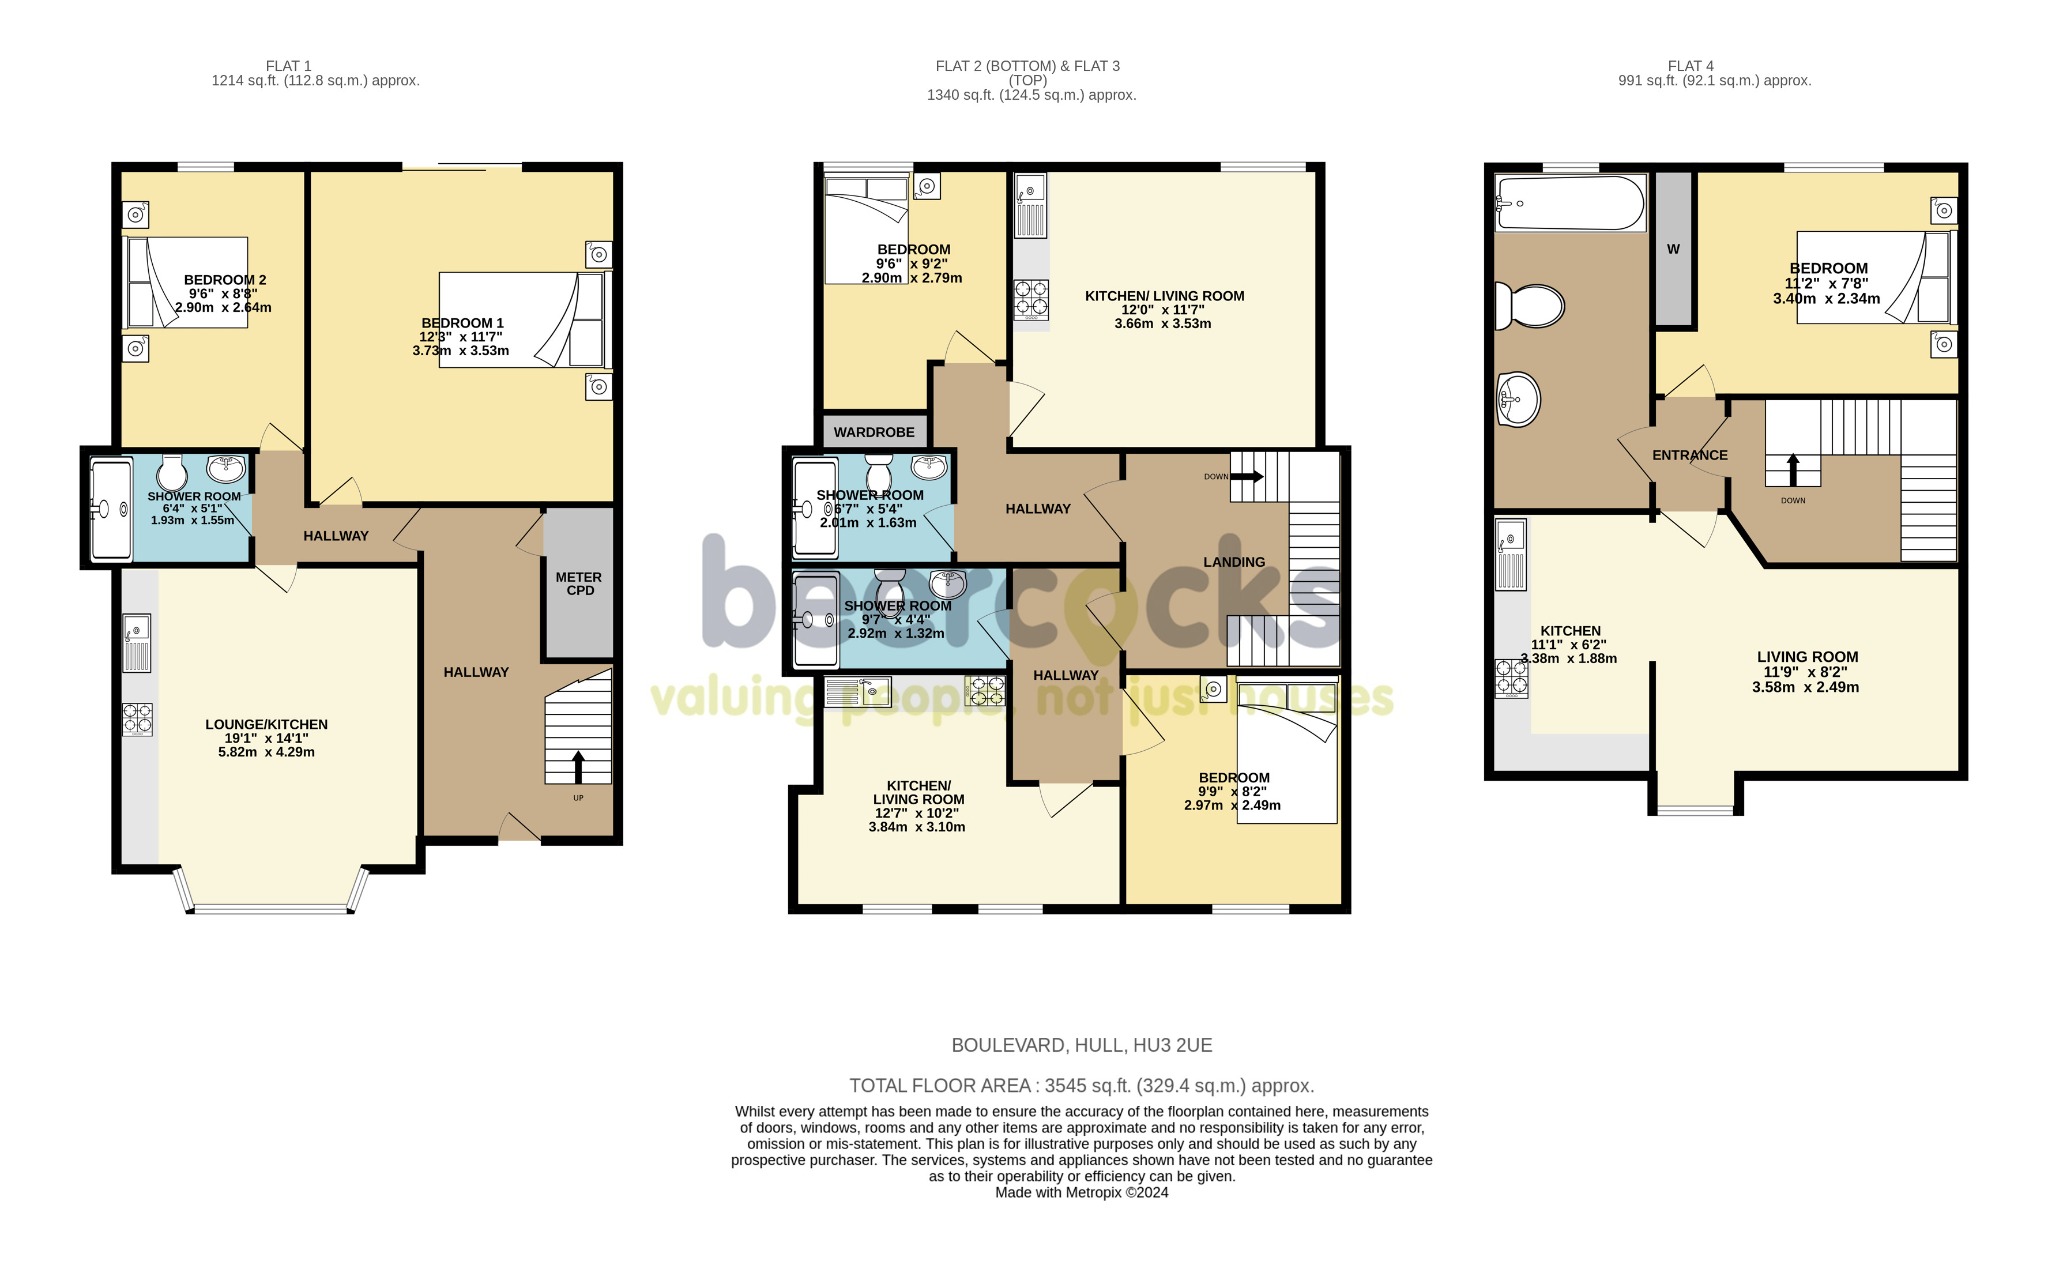 5 bed terraced house for sale in Boulevard, Hull - Property Floorplan